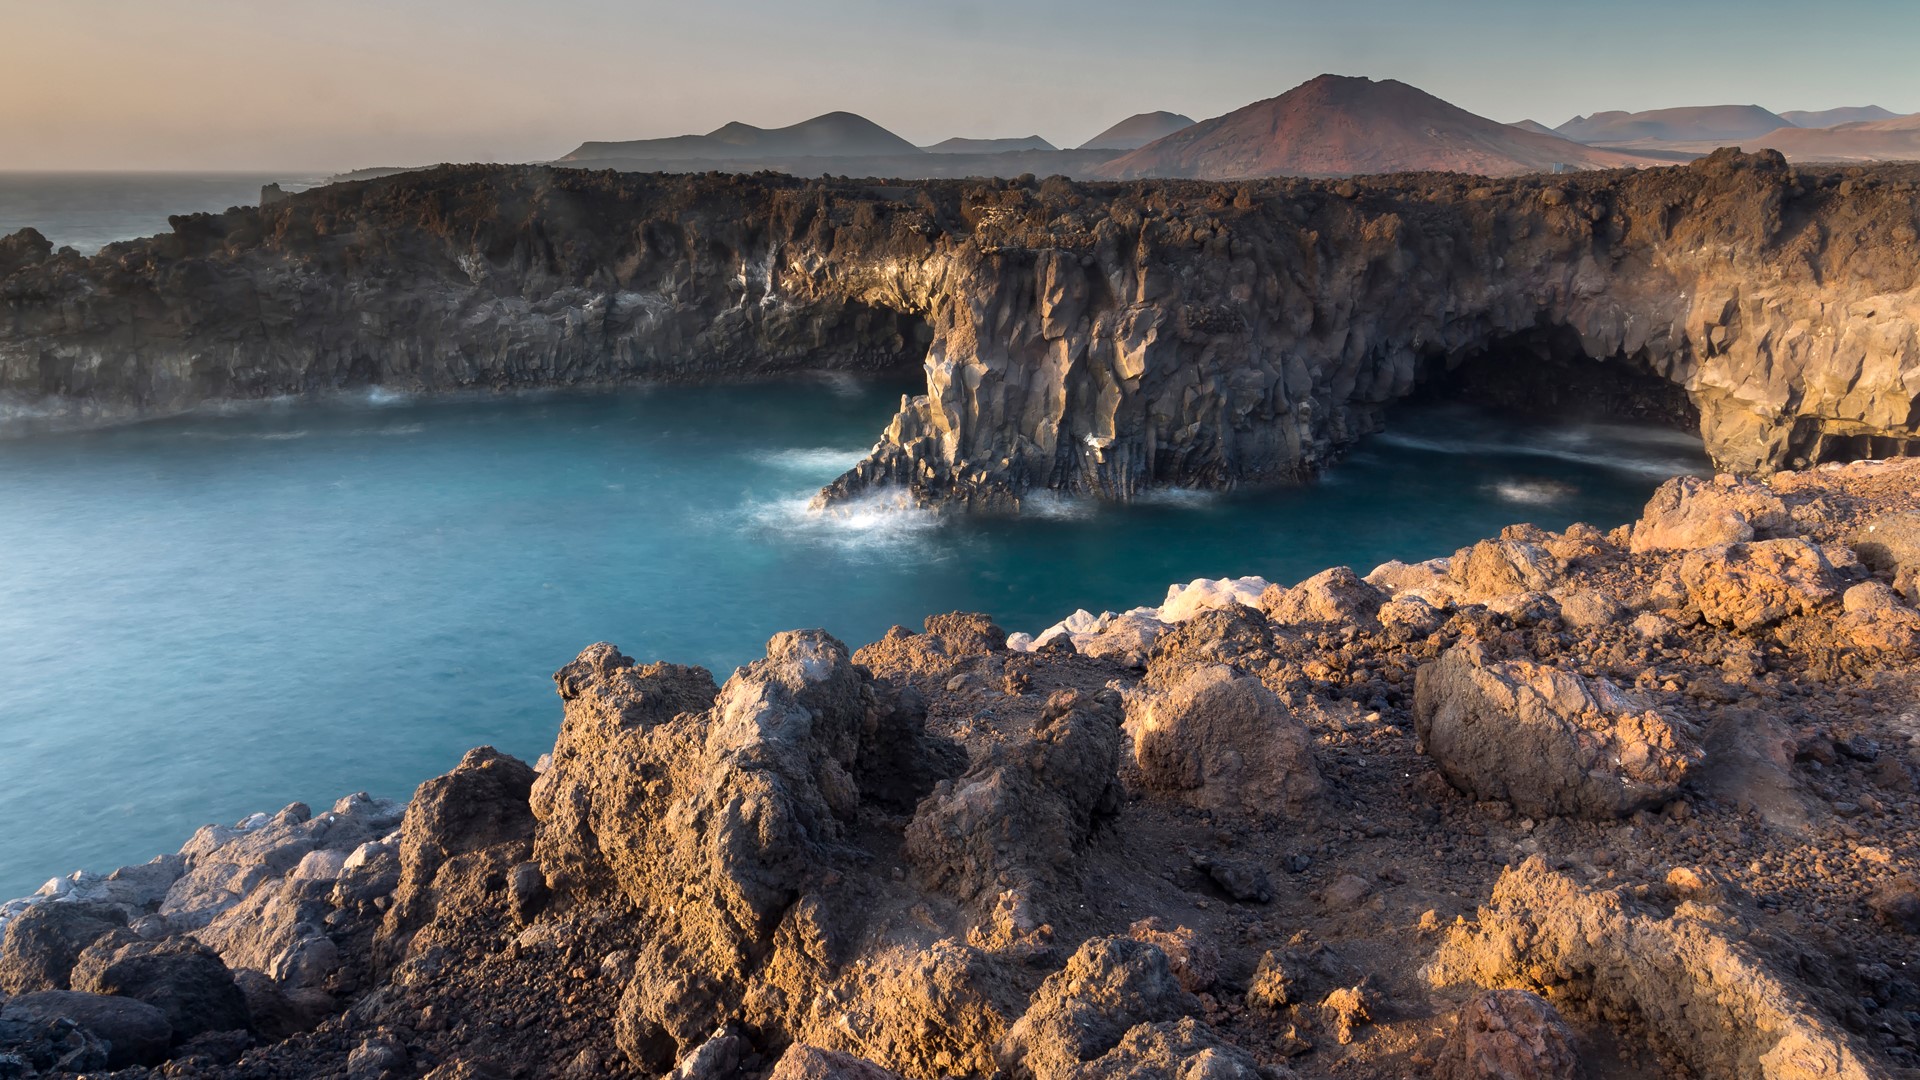 General 1920x1080 nature landscape rocks water cave mountains sea long exposure sunrise Canary Islands Spain Lanzarote